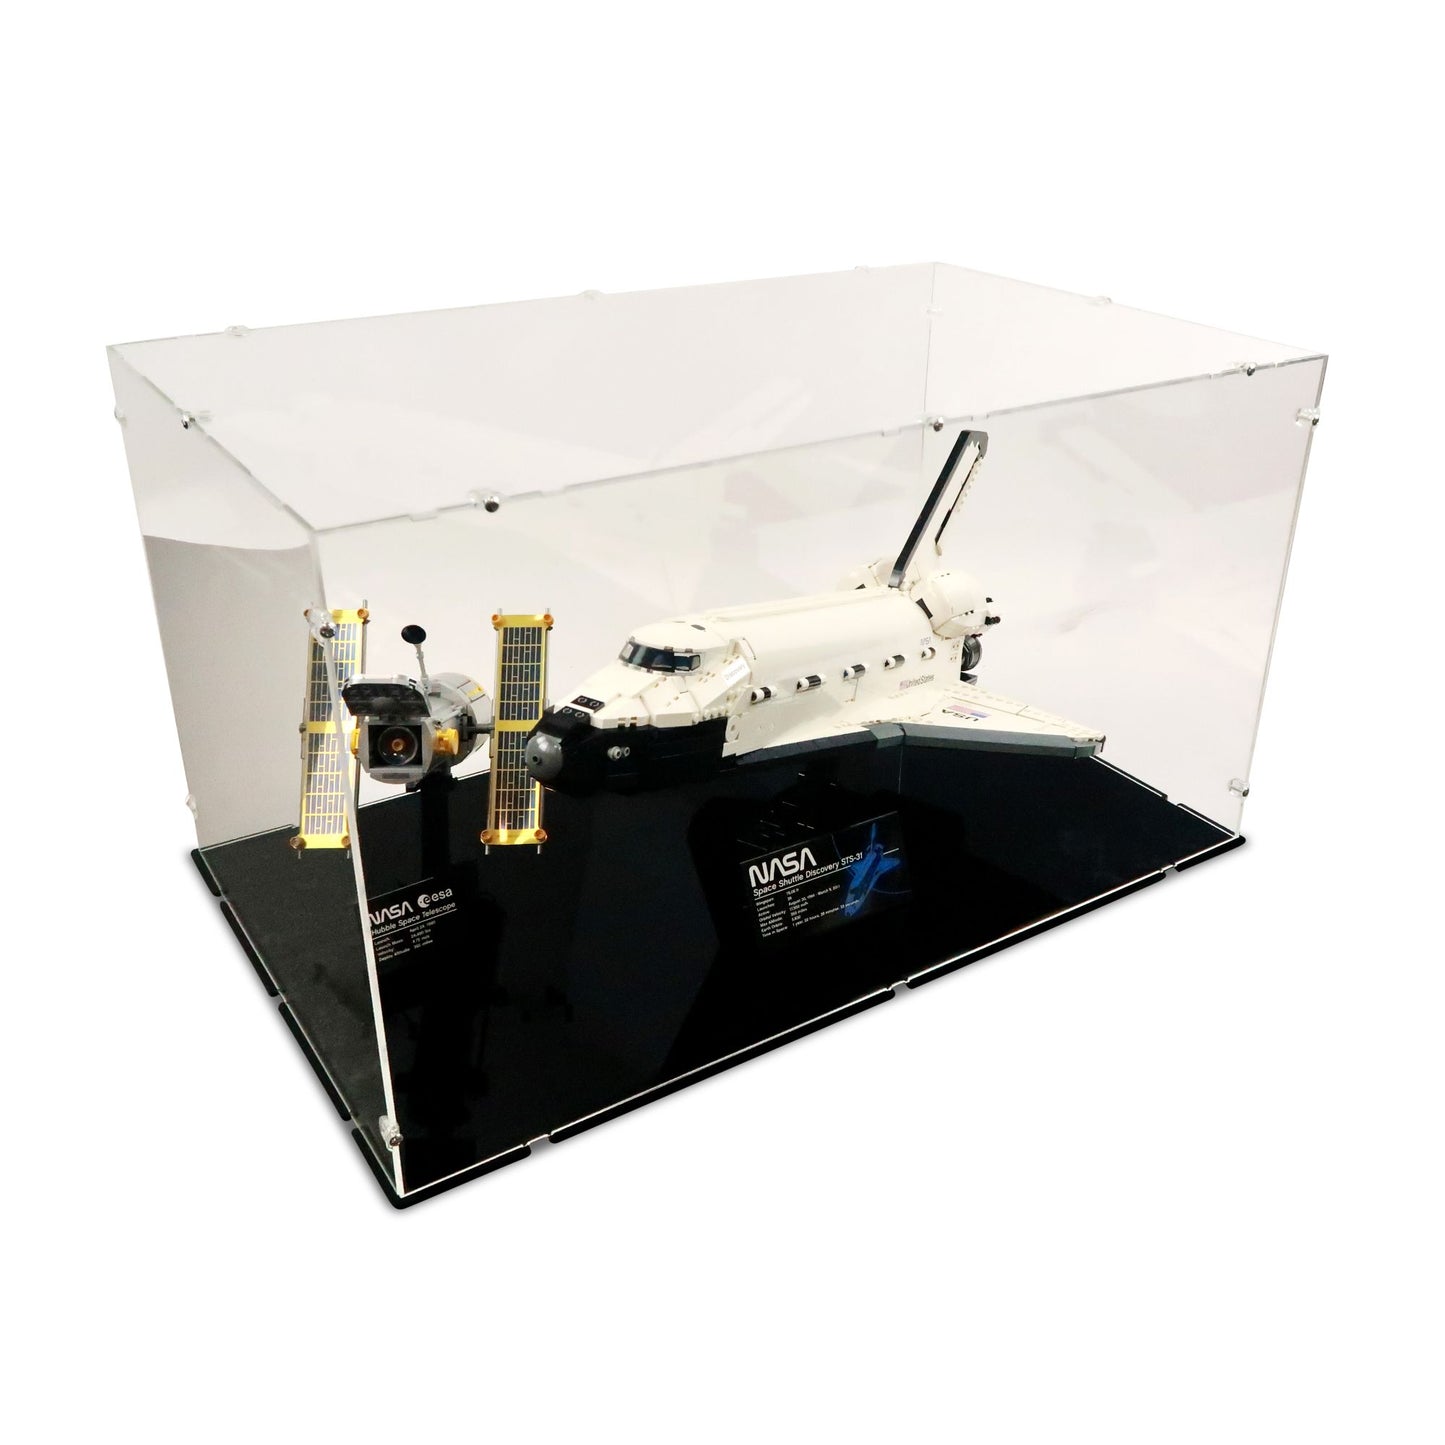 10283 NASA Space Shuttle Discovery Display Case